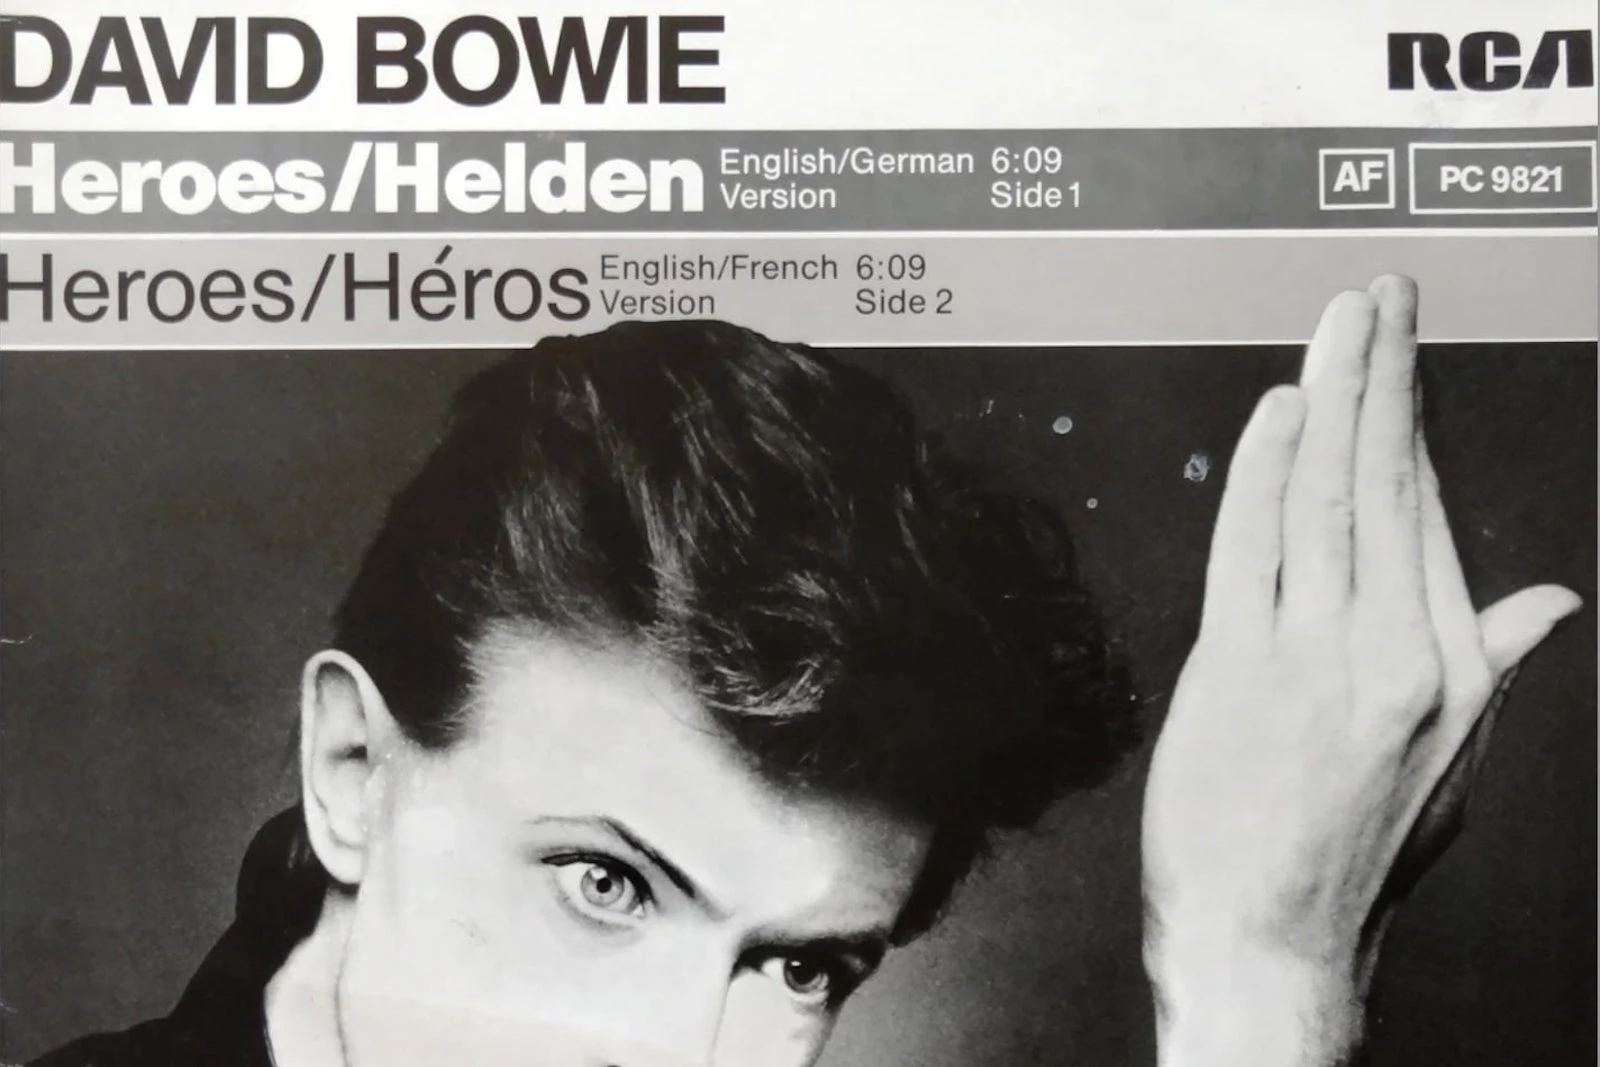 How Familiar Lovers at Berlin Wall Sparked David Bowie's 'Heroes'